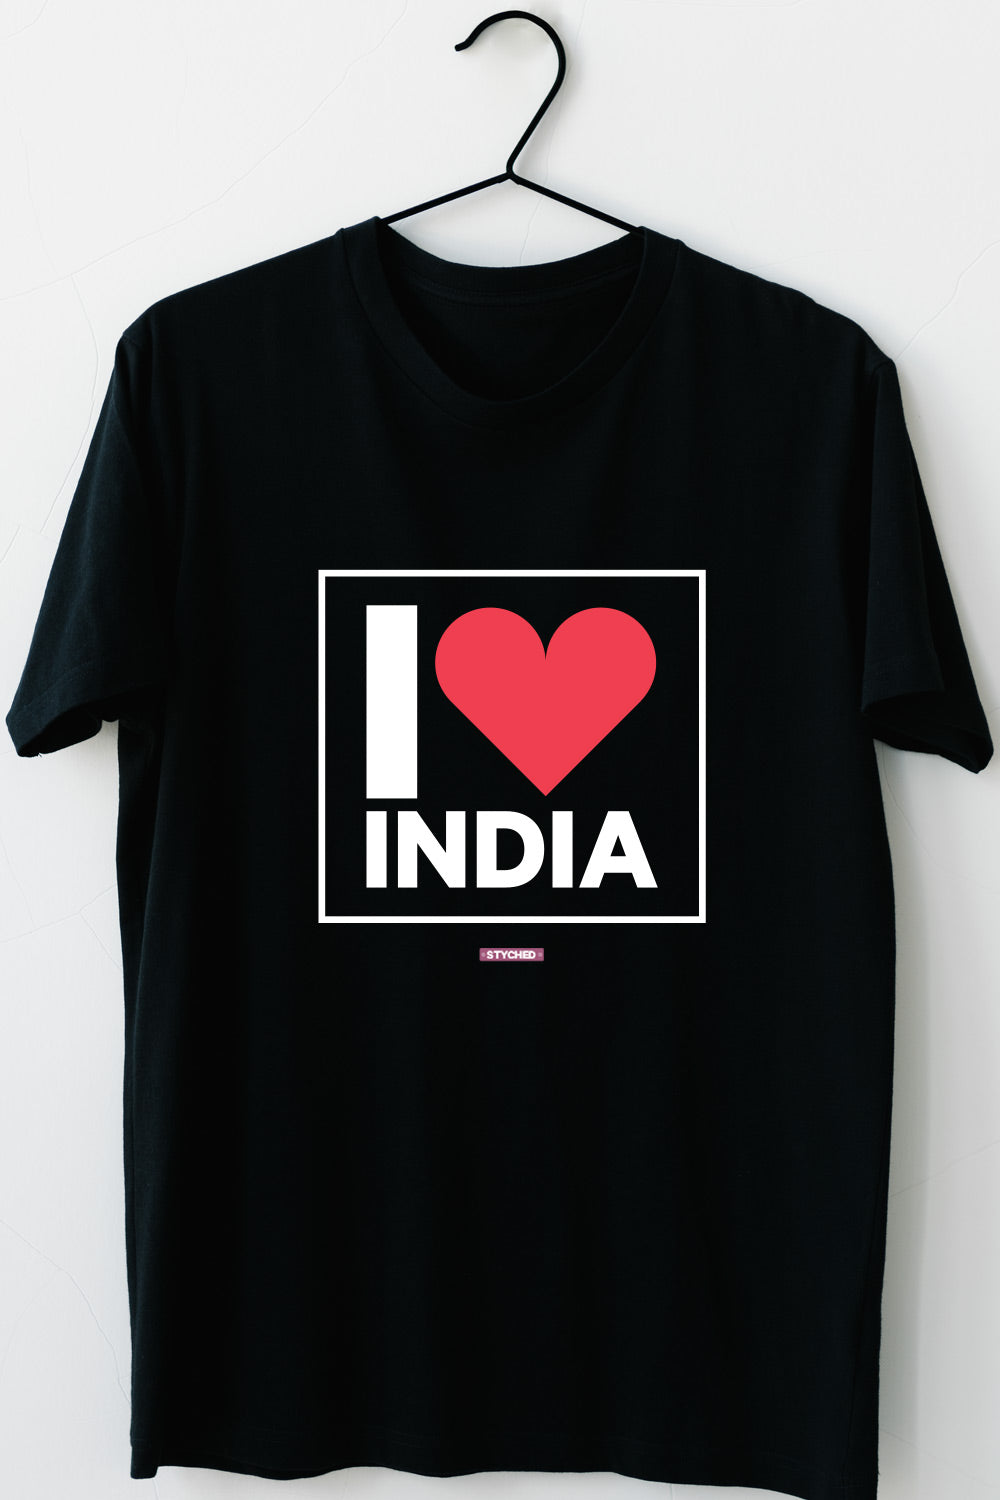 I love India - Styched in India Graphic T-Shirt Black Color